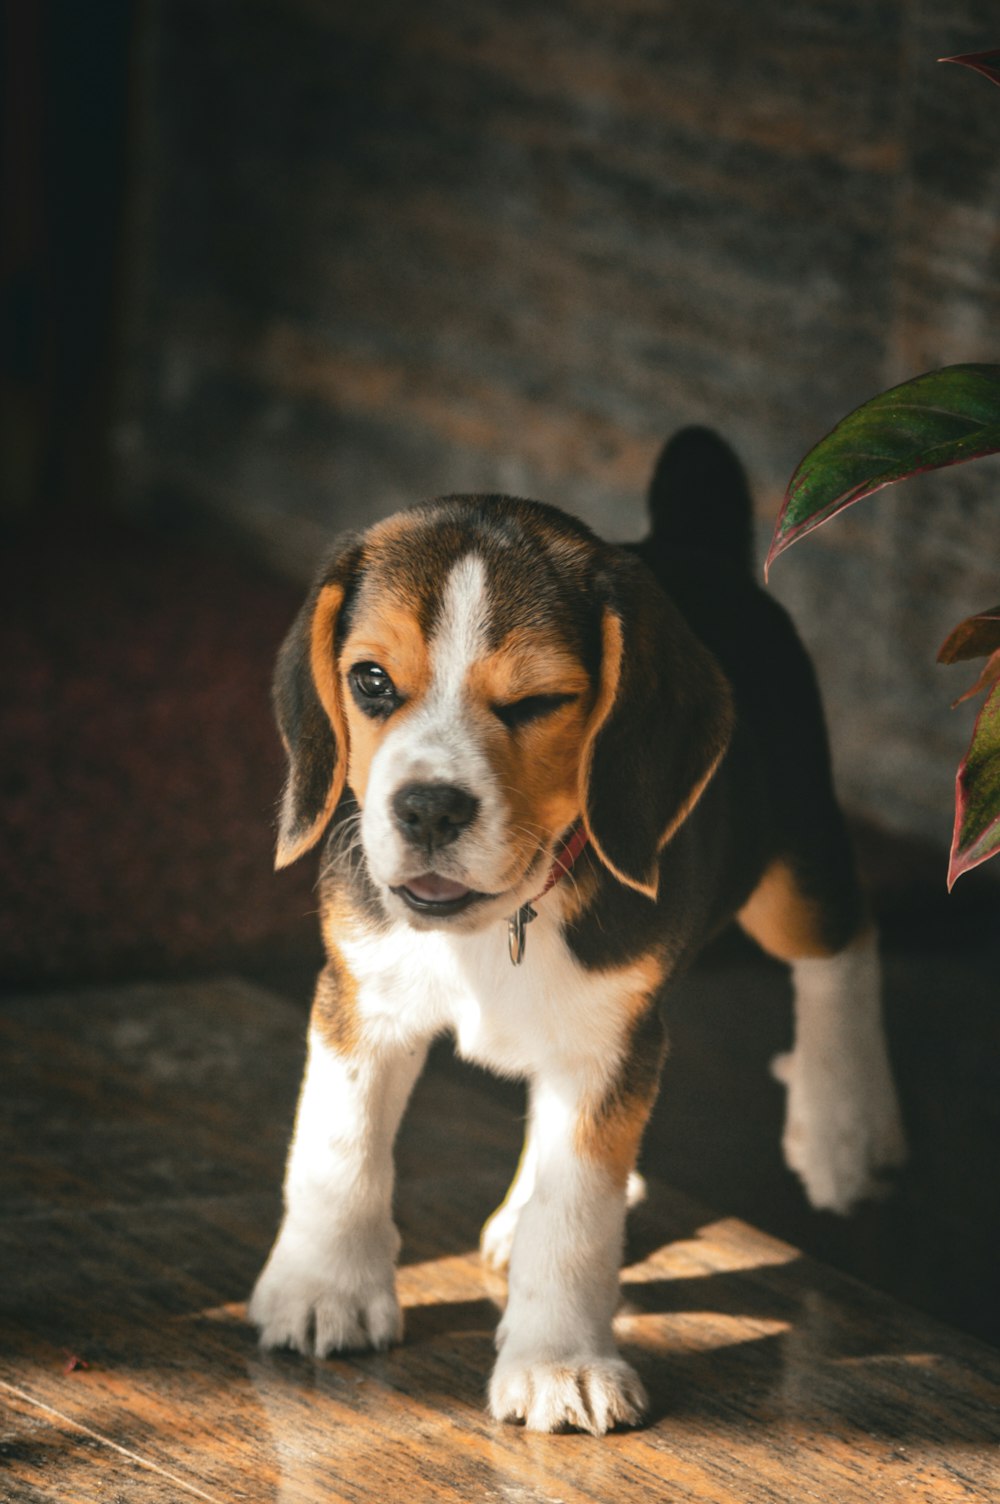 a beagle puppy standing on a wooden floor next to a plant